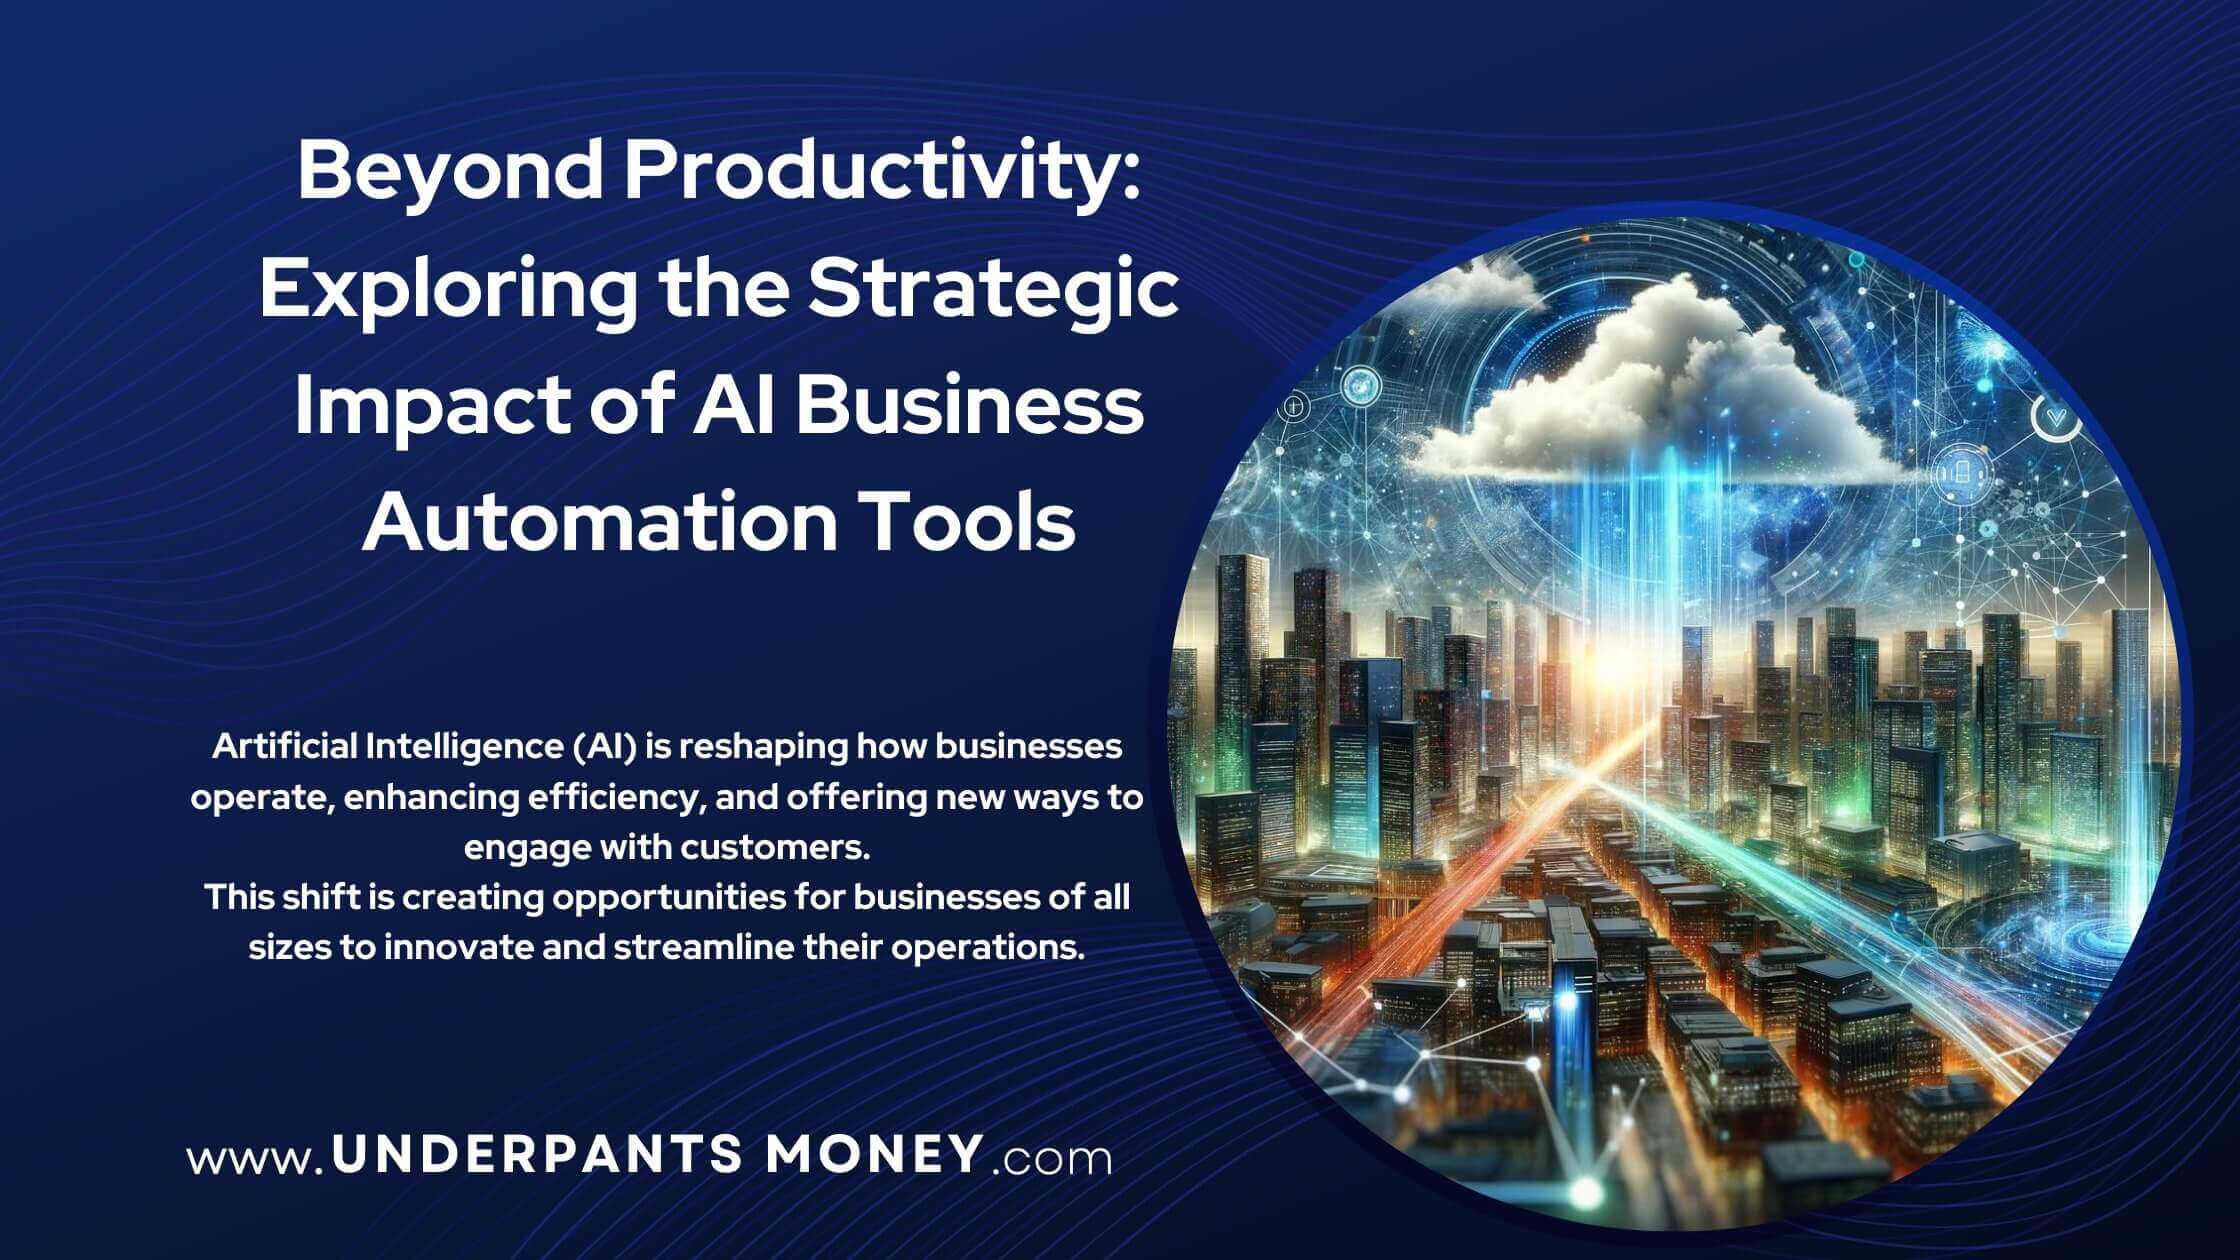 AI Business Automation tools title and description text on blue with image of cityscape showing ai intergrated into a city